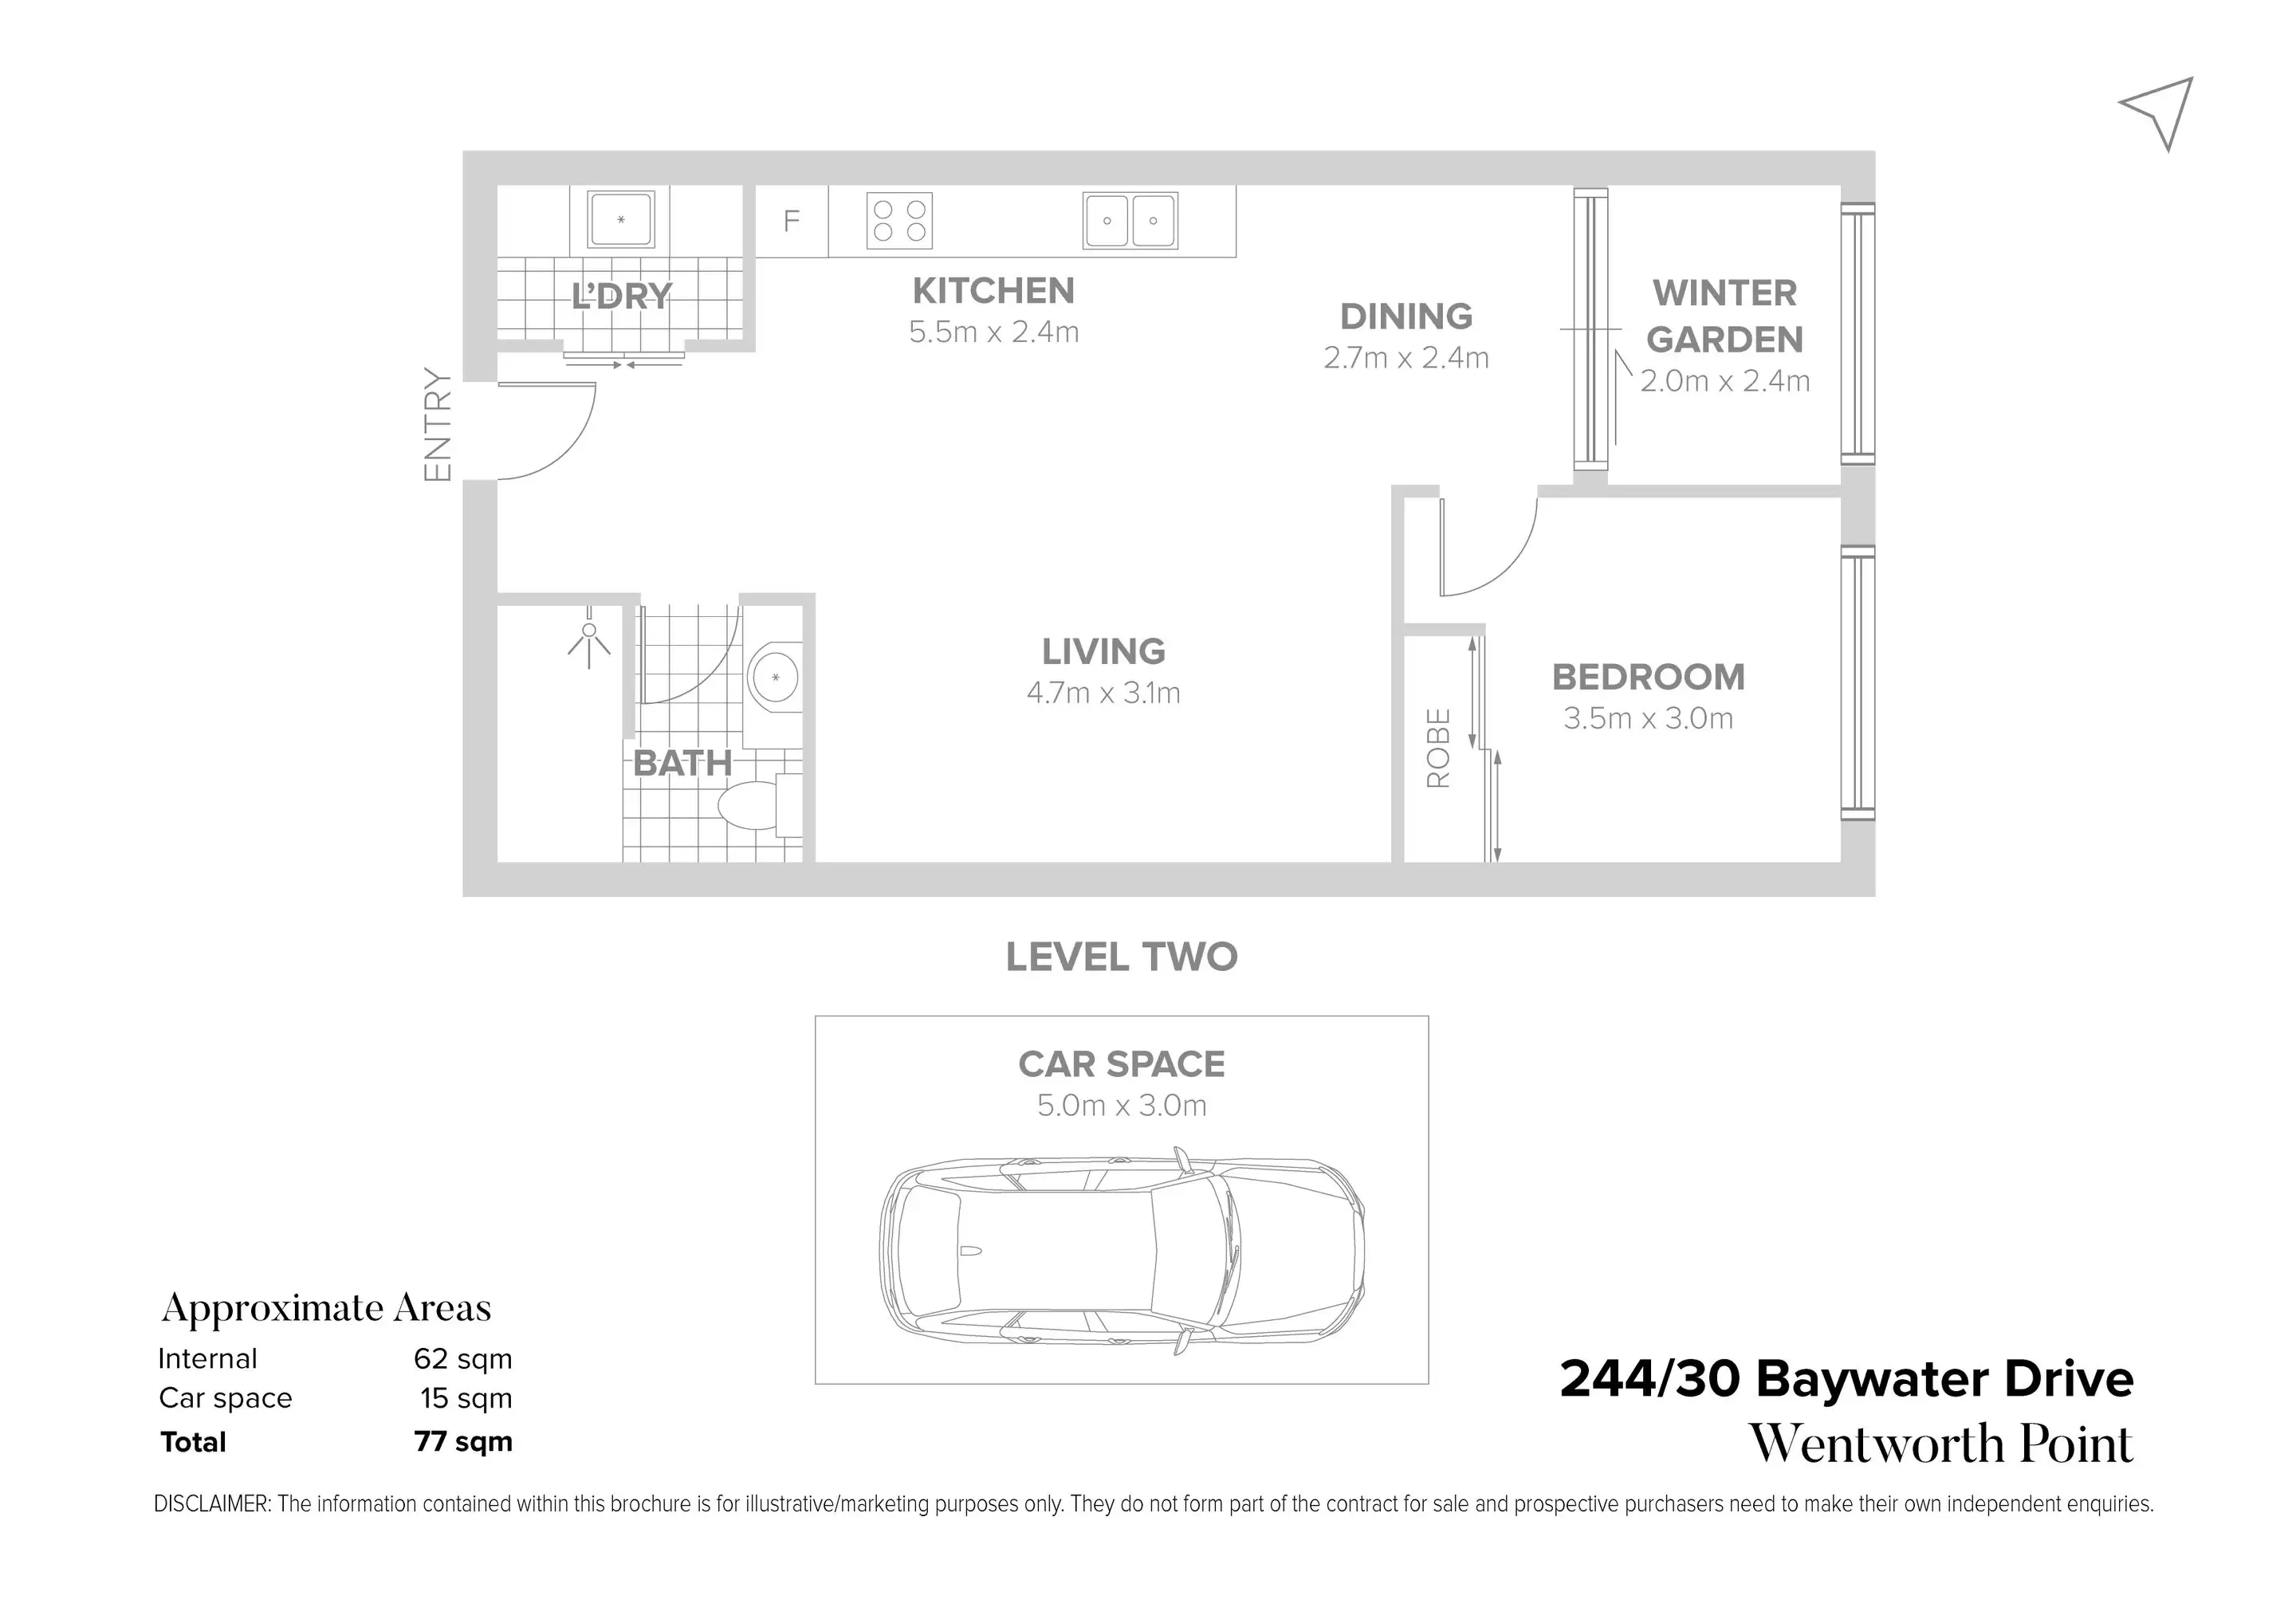 244/30 Baywater Drive, Wentworth Point Sold by Chidiac Realty - floorplan